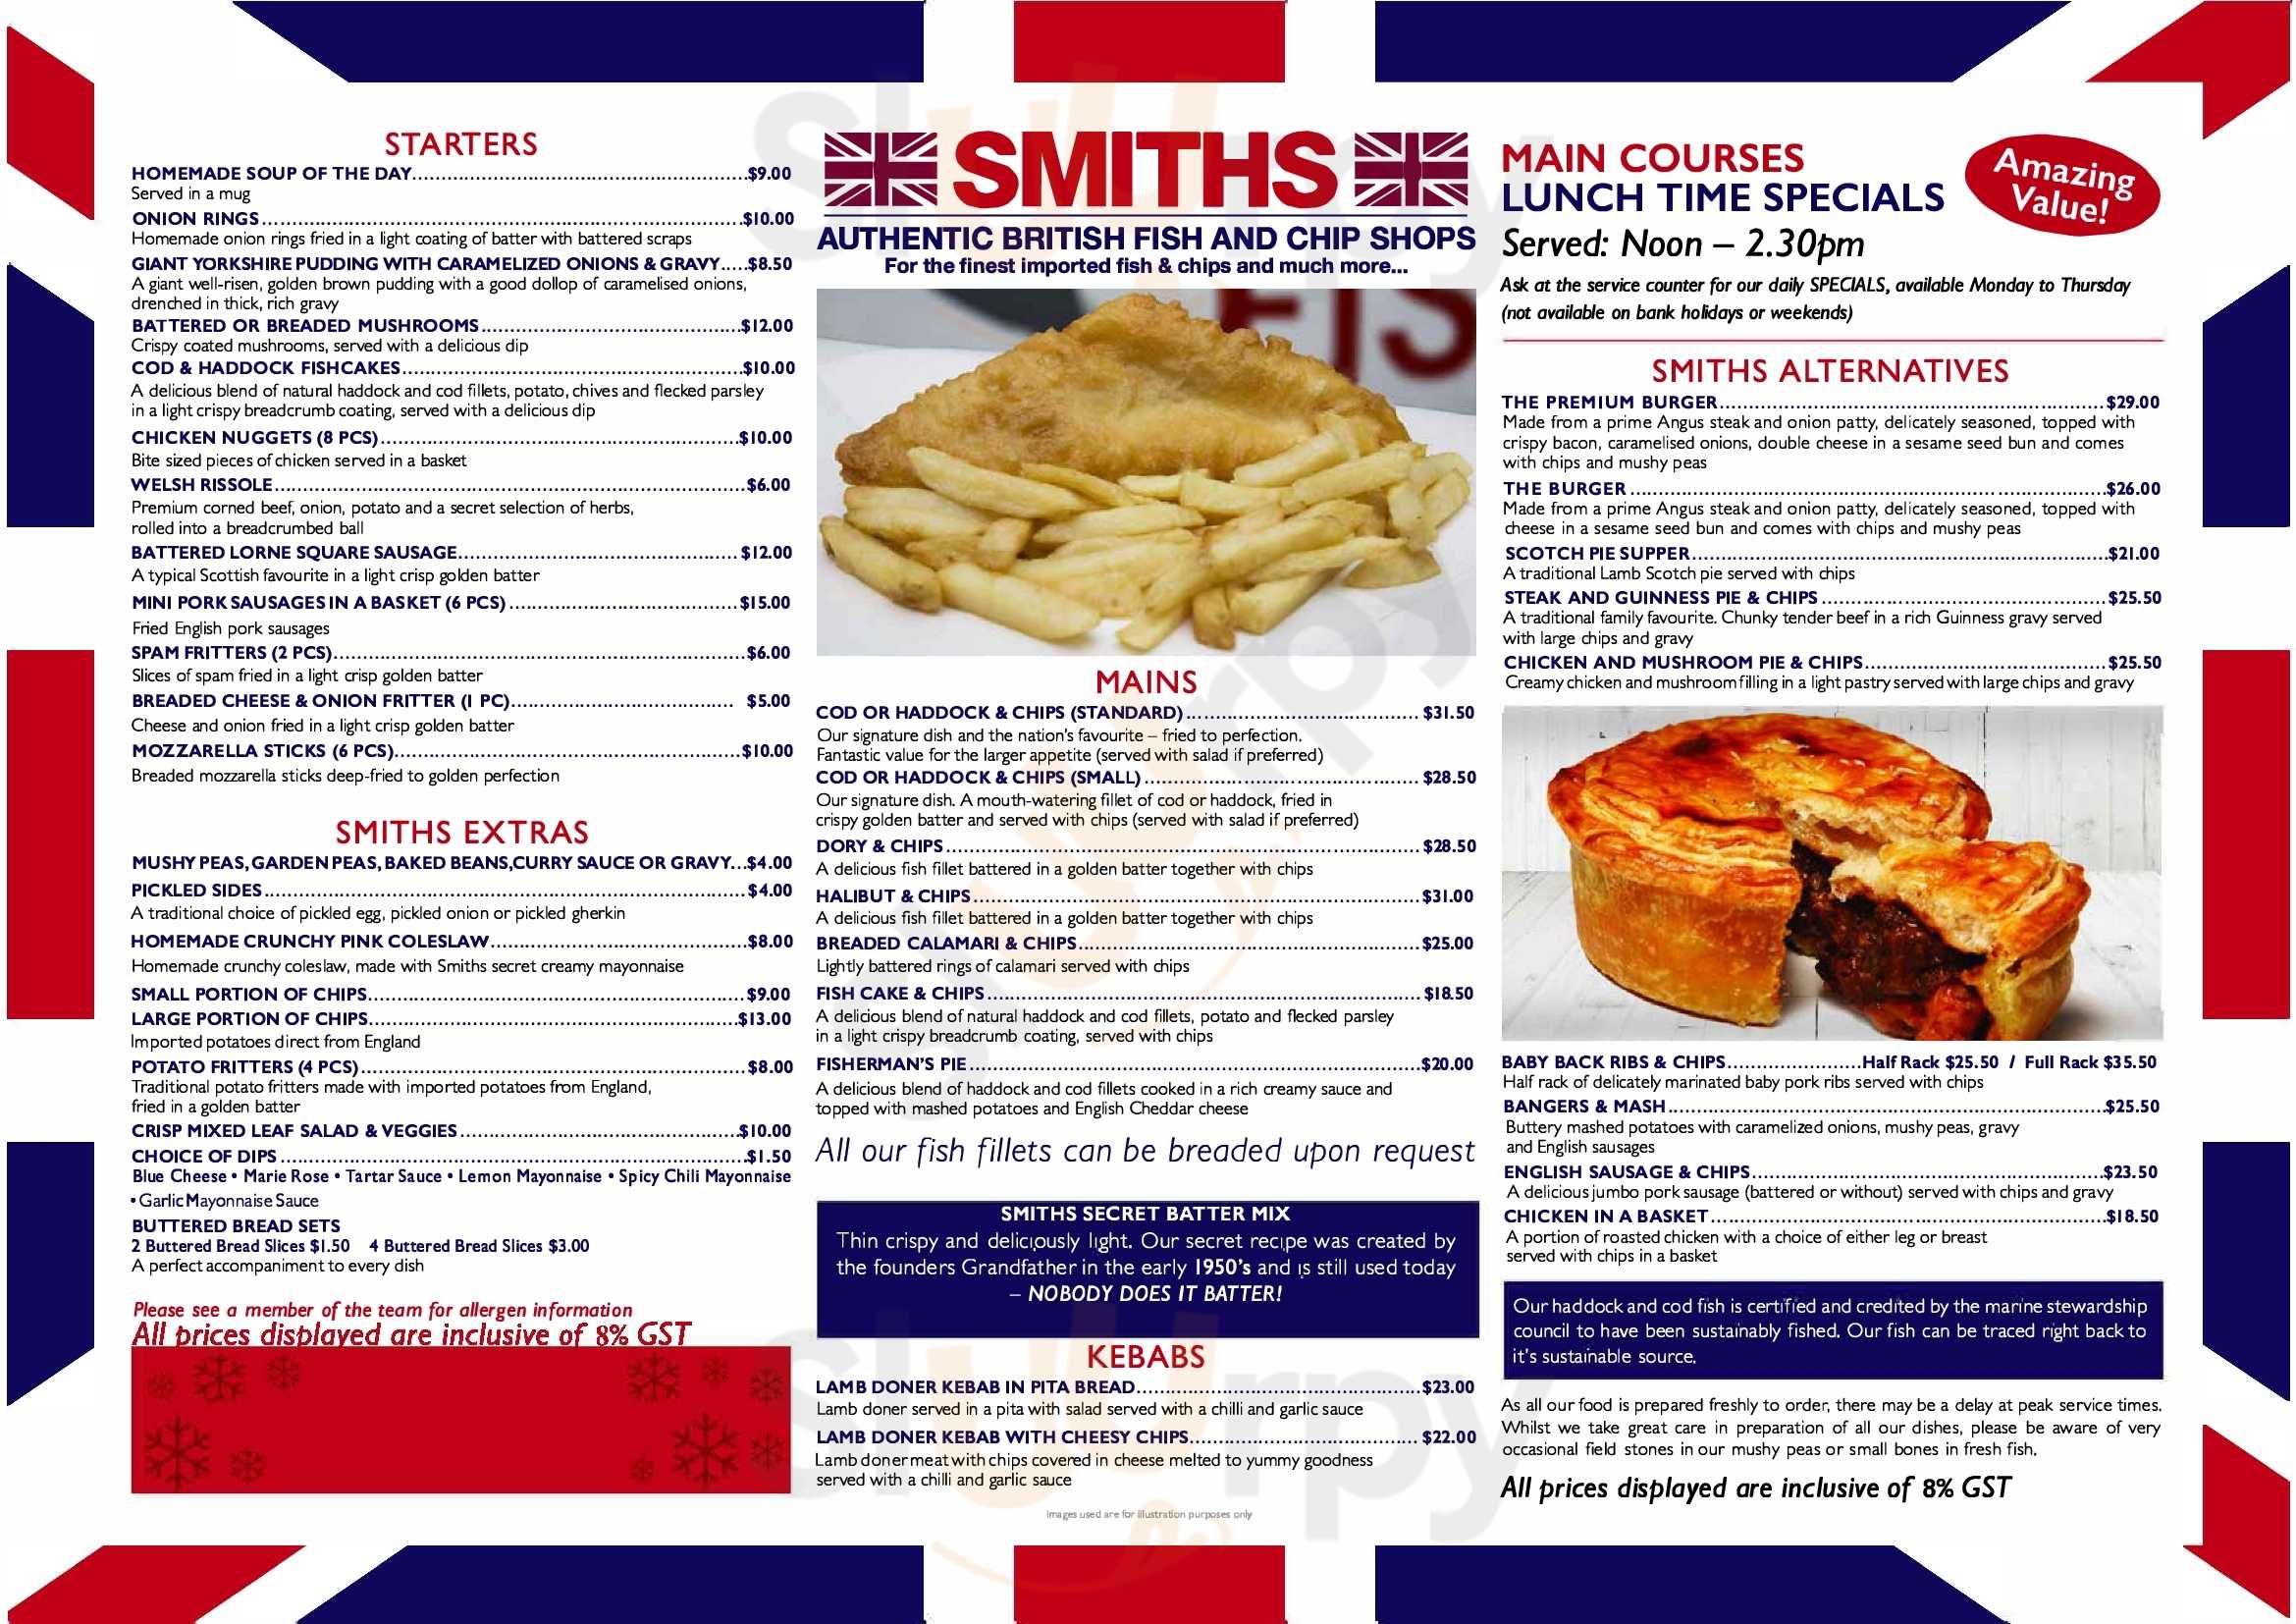 Smiths Authentic British Fish And Chips Singapore Menu - 1